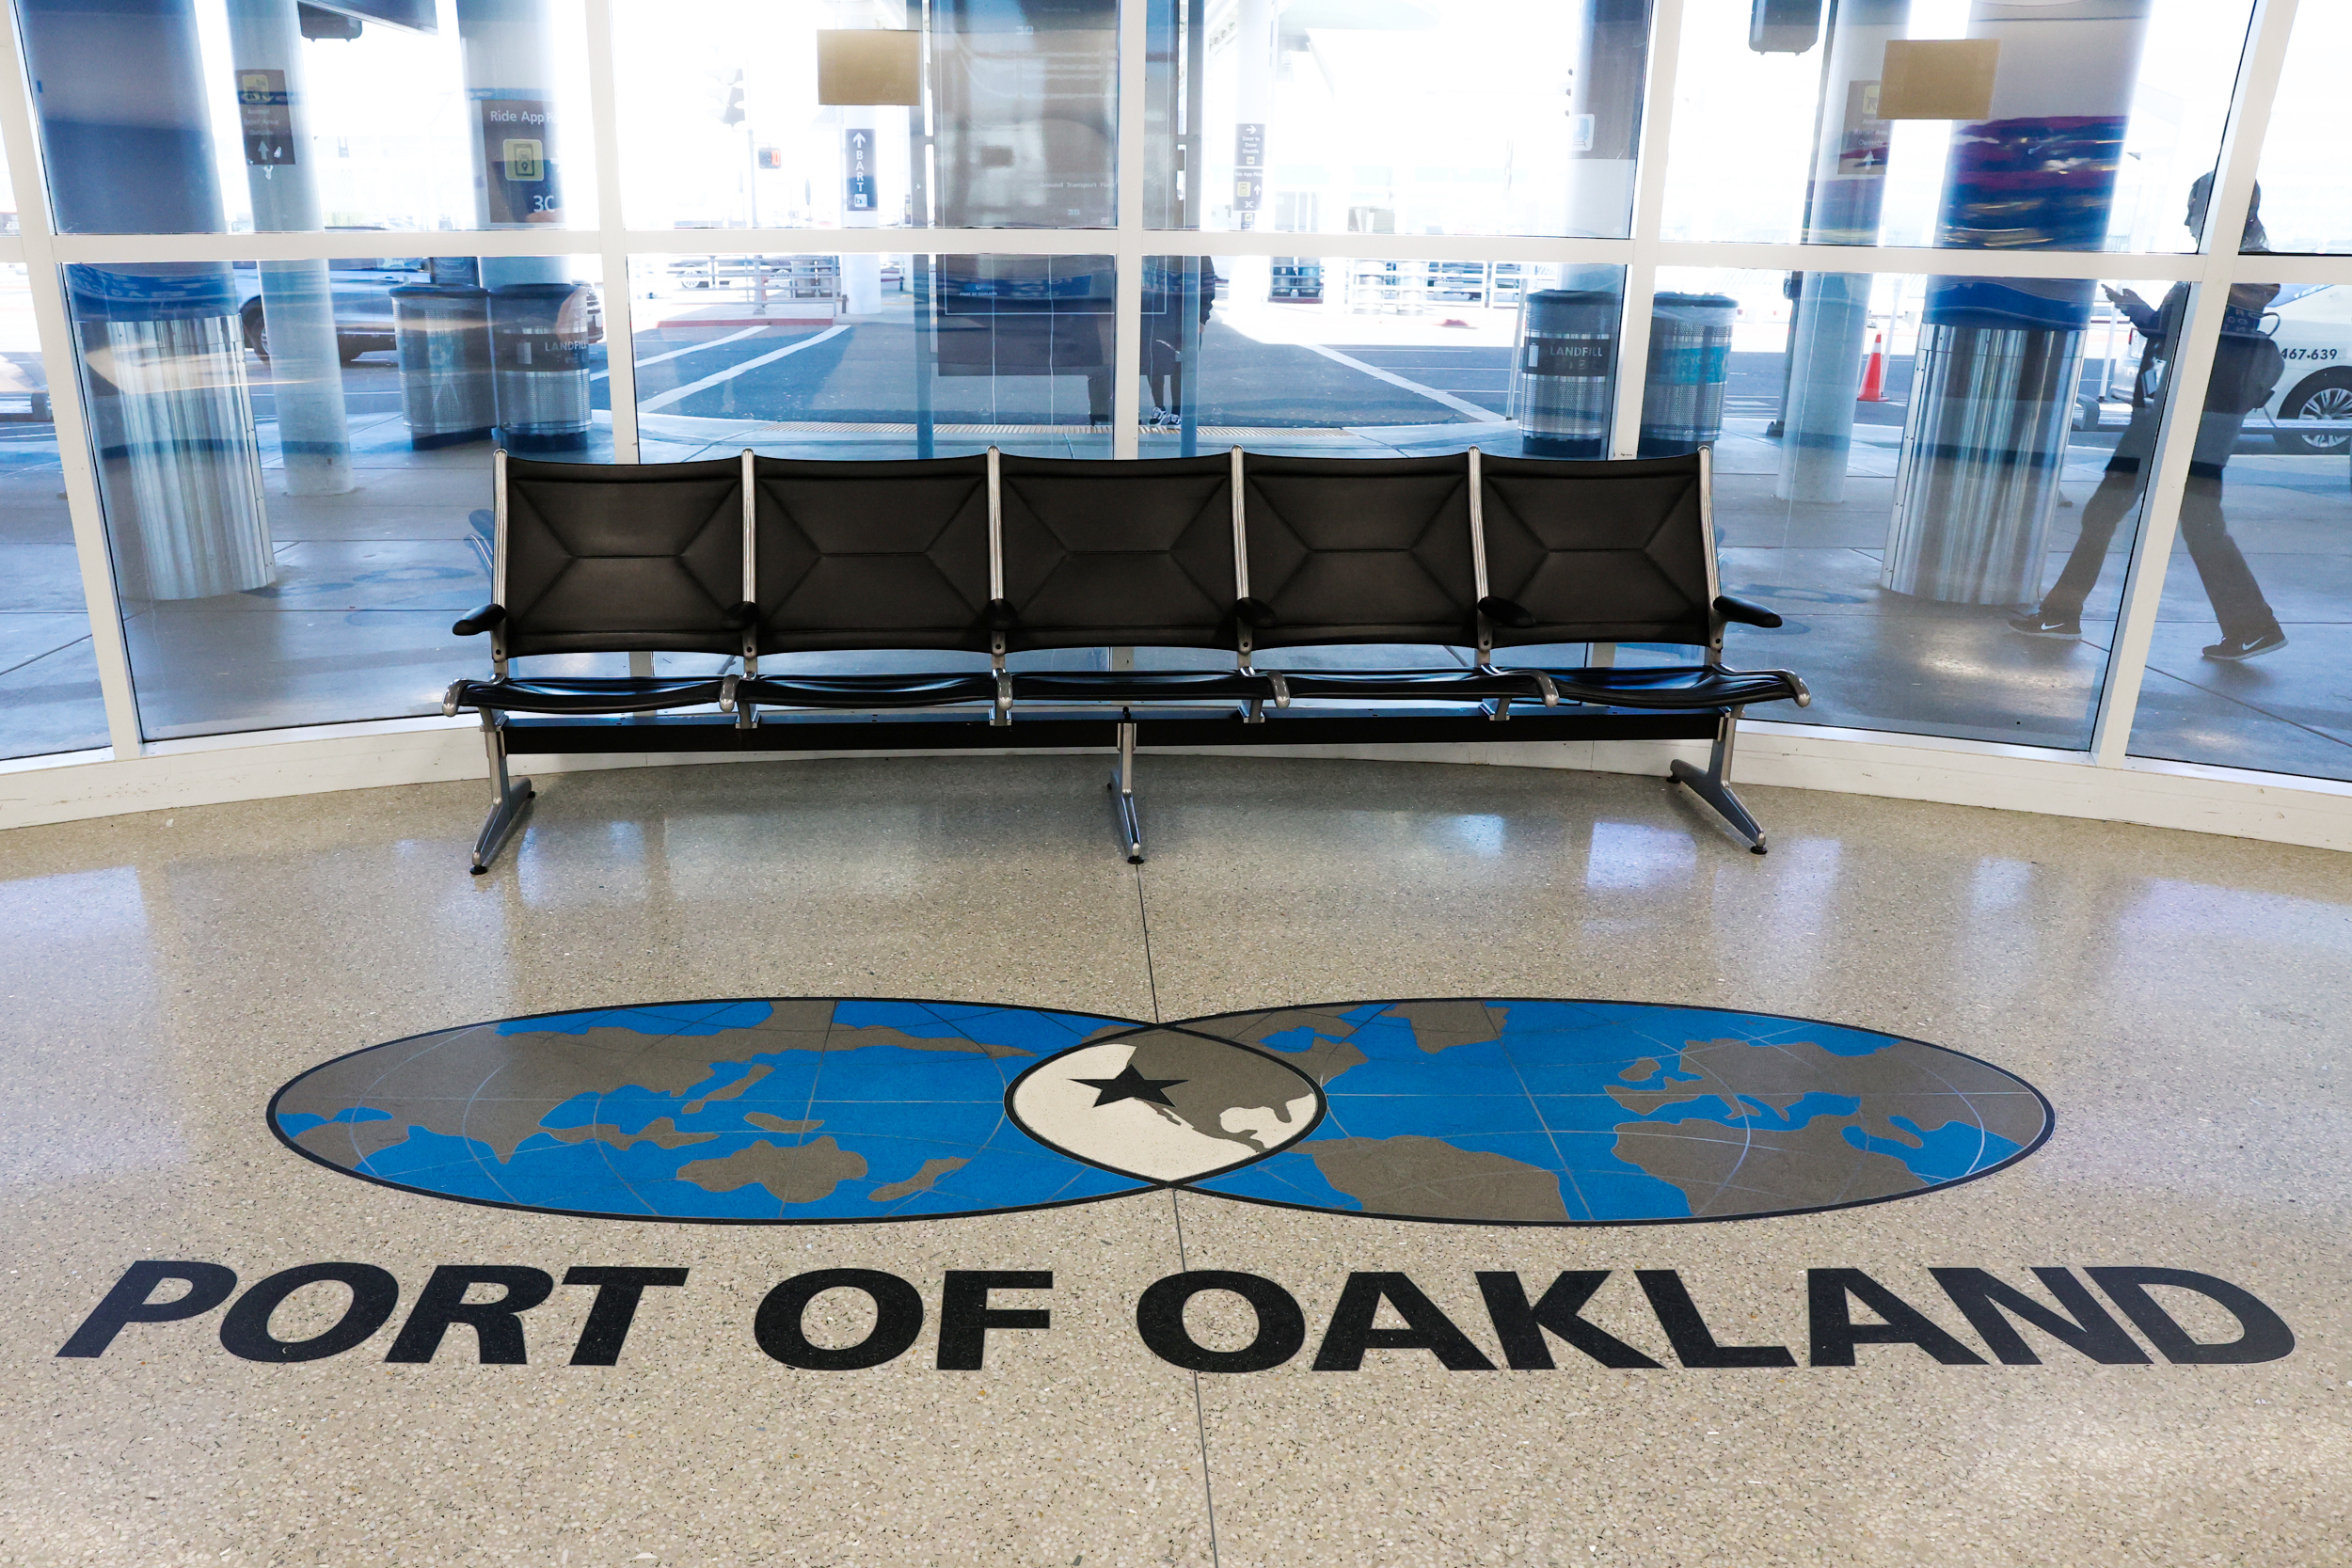 A row of black seats in a terminal with a floor emblem reading &quot;PORT OF OAKLAND&quot; featuring a globe and airplane.